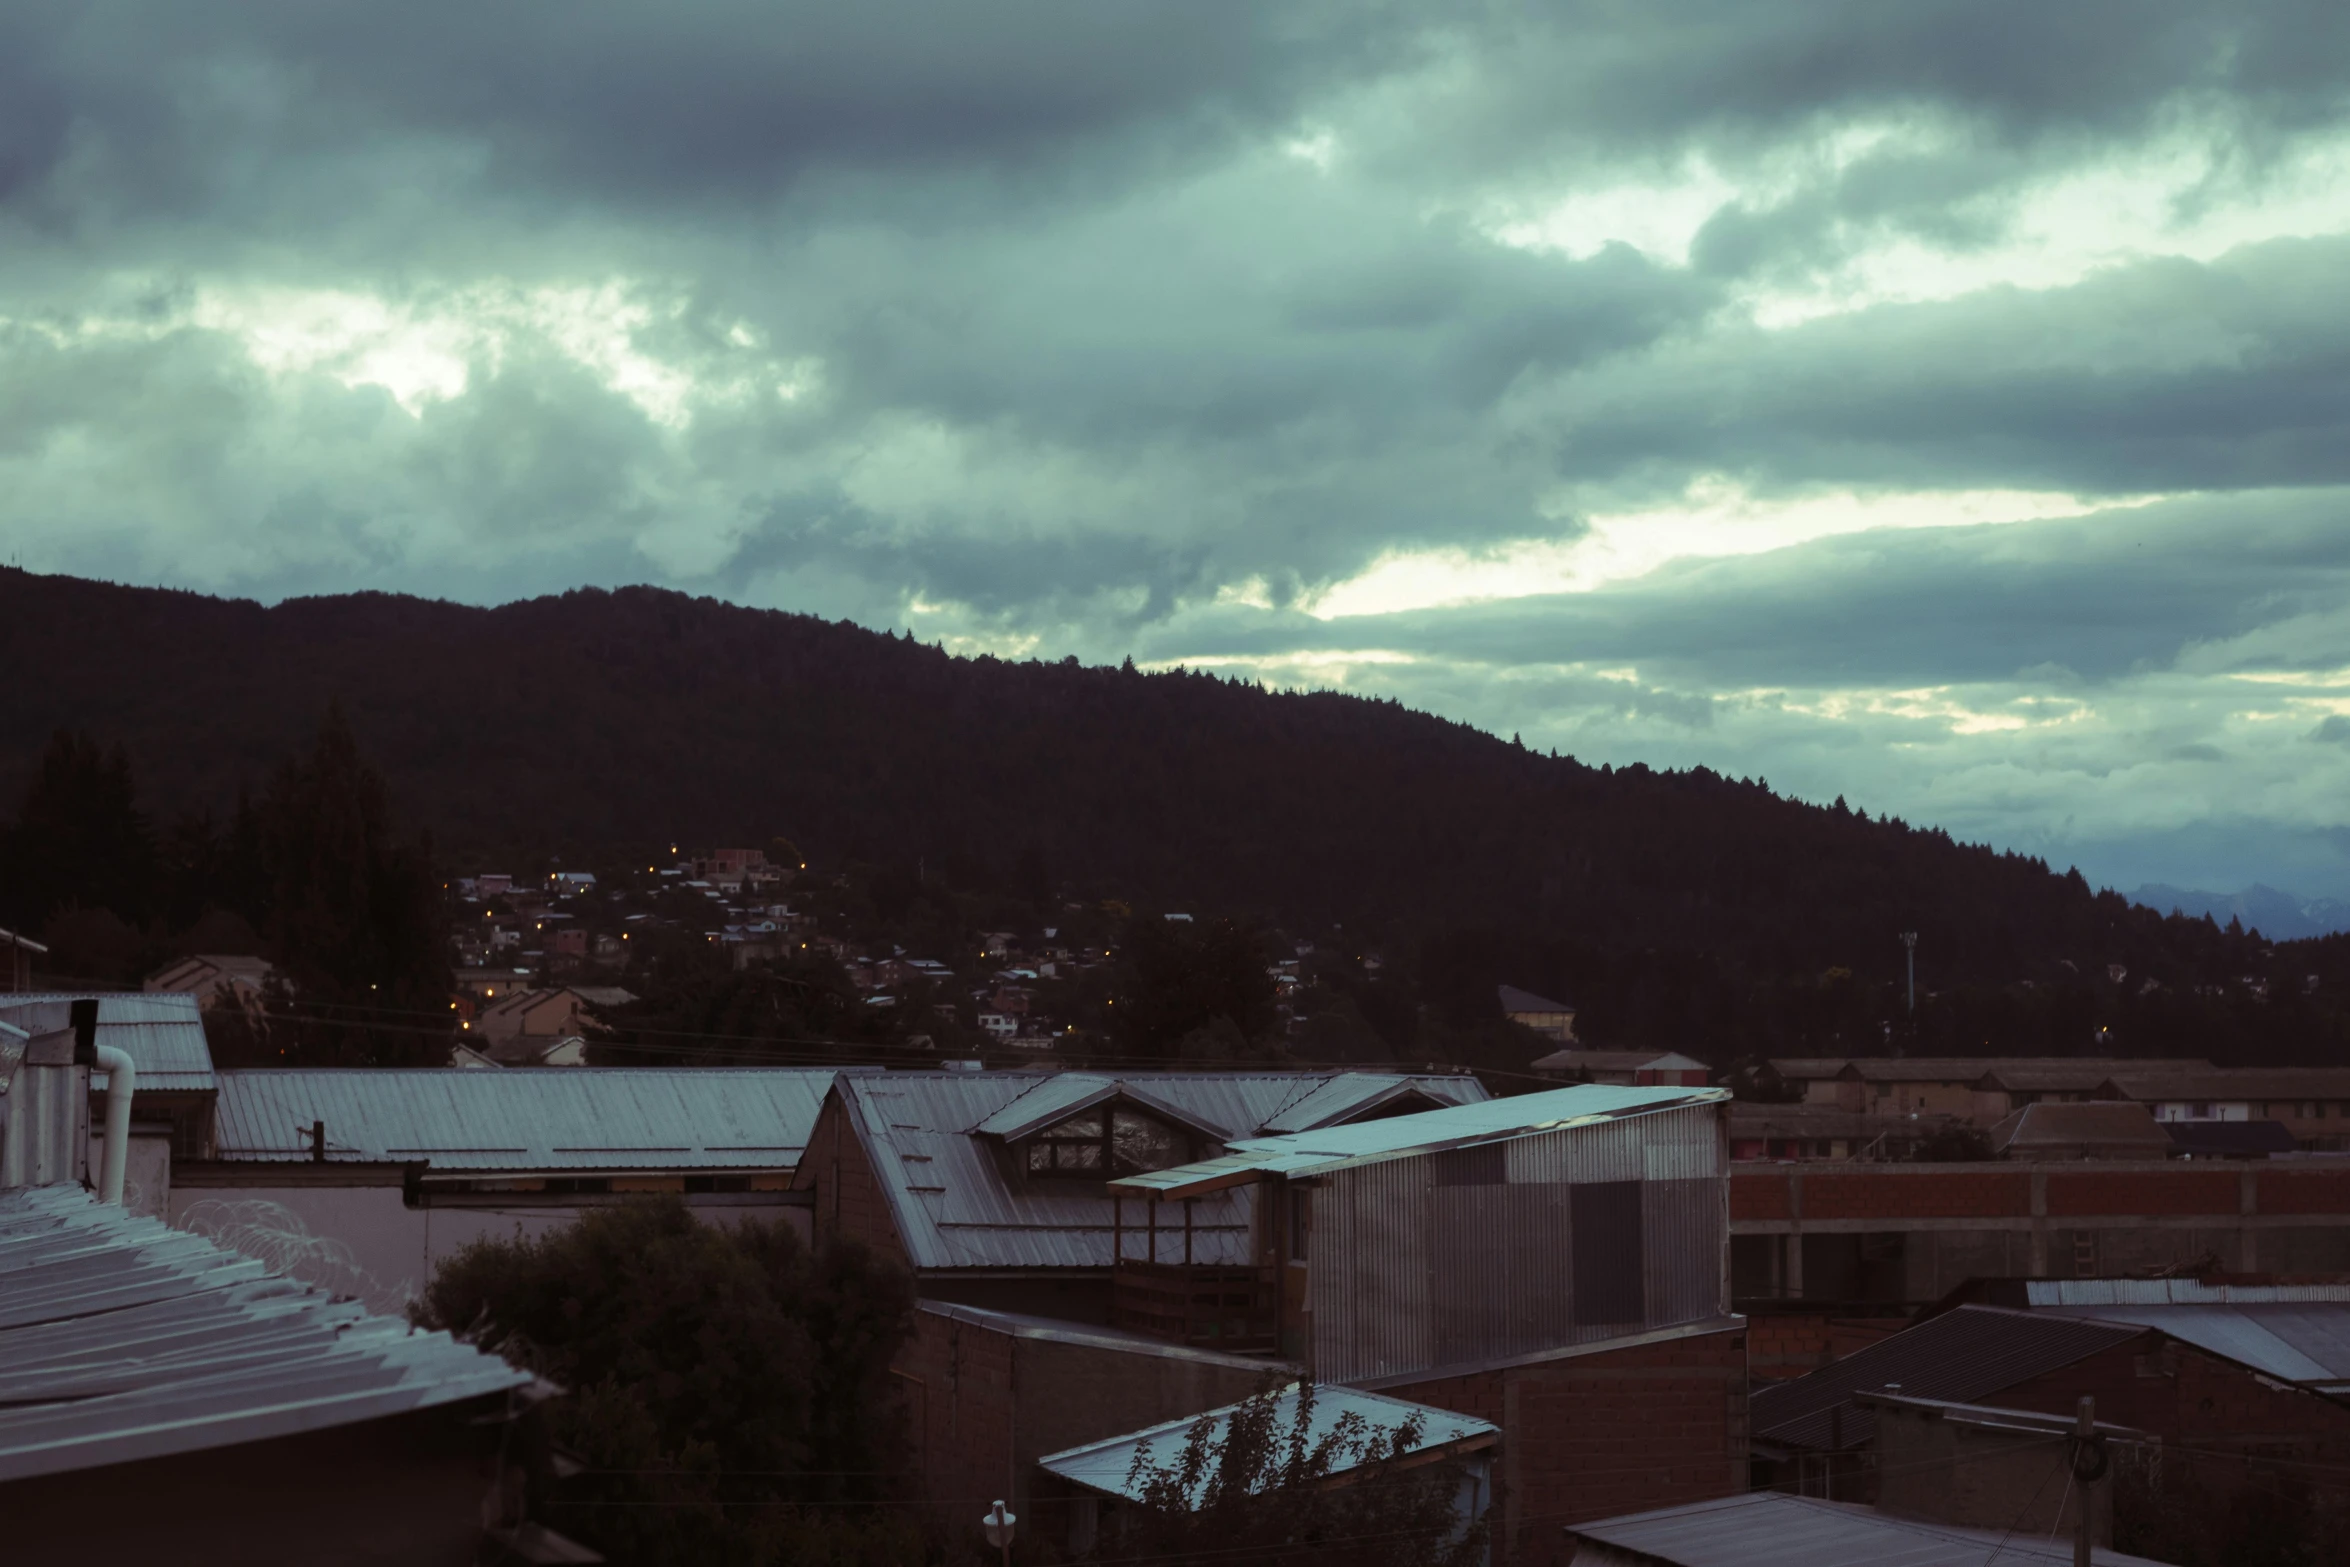 the view from behind the rooftops is of dark clouds, buildings and mountains